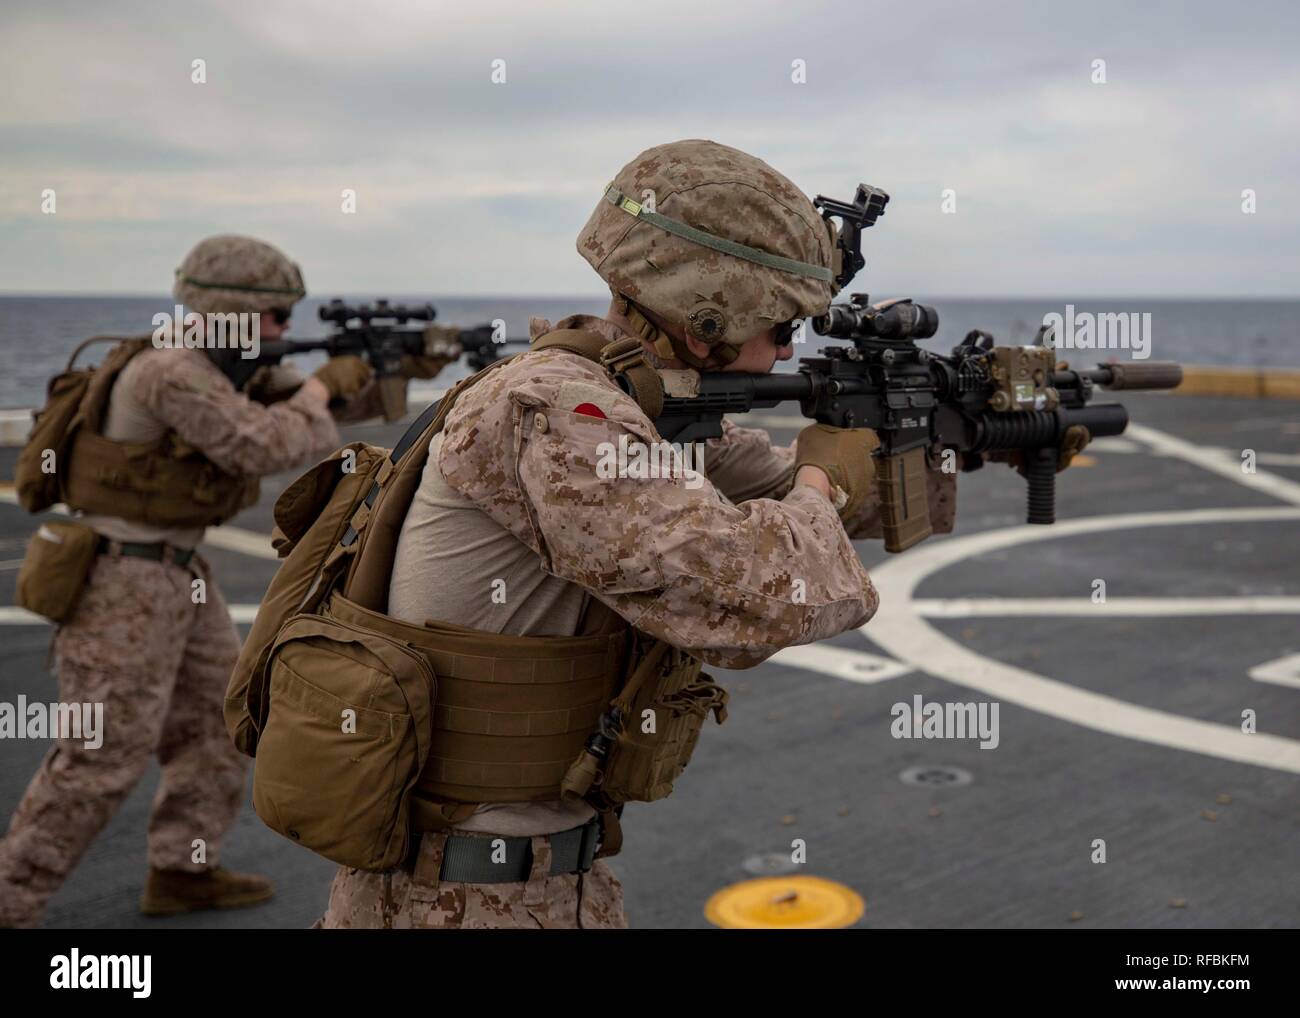 MEDITERRANEAN SEA (Jan. 21, 2019) Marines with the Battalion Landing Team, 1st Battalion, 2nd Marine Regiment, 22nd Marine Expeditionary Unit, practice immediate action drills on the flight-deck of the USS Arlington (LPD 24) during a live-fire deck shoot while deployed in the Mediterranean Sea, Jan. 21, 2019. The USS Arlington is making a scheduled deployment as part of the 22nd MEU and the Kearsarge Amphibious Ready Group, in support of maritime security operations, crisis response and theatre security cooperation, while also providing a forward Naval and Marine presence. (U.S. Marine Corps p Stock Photo